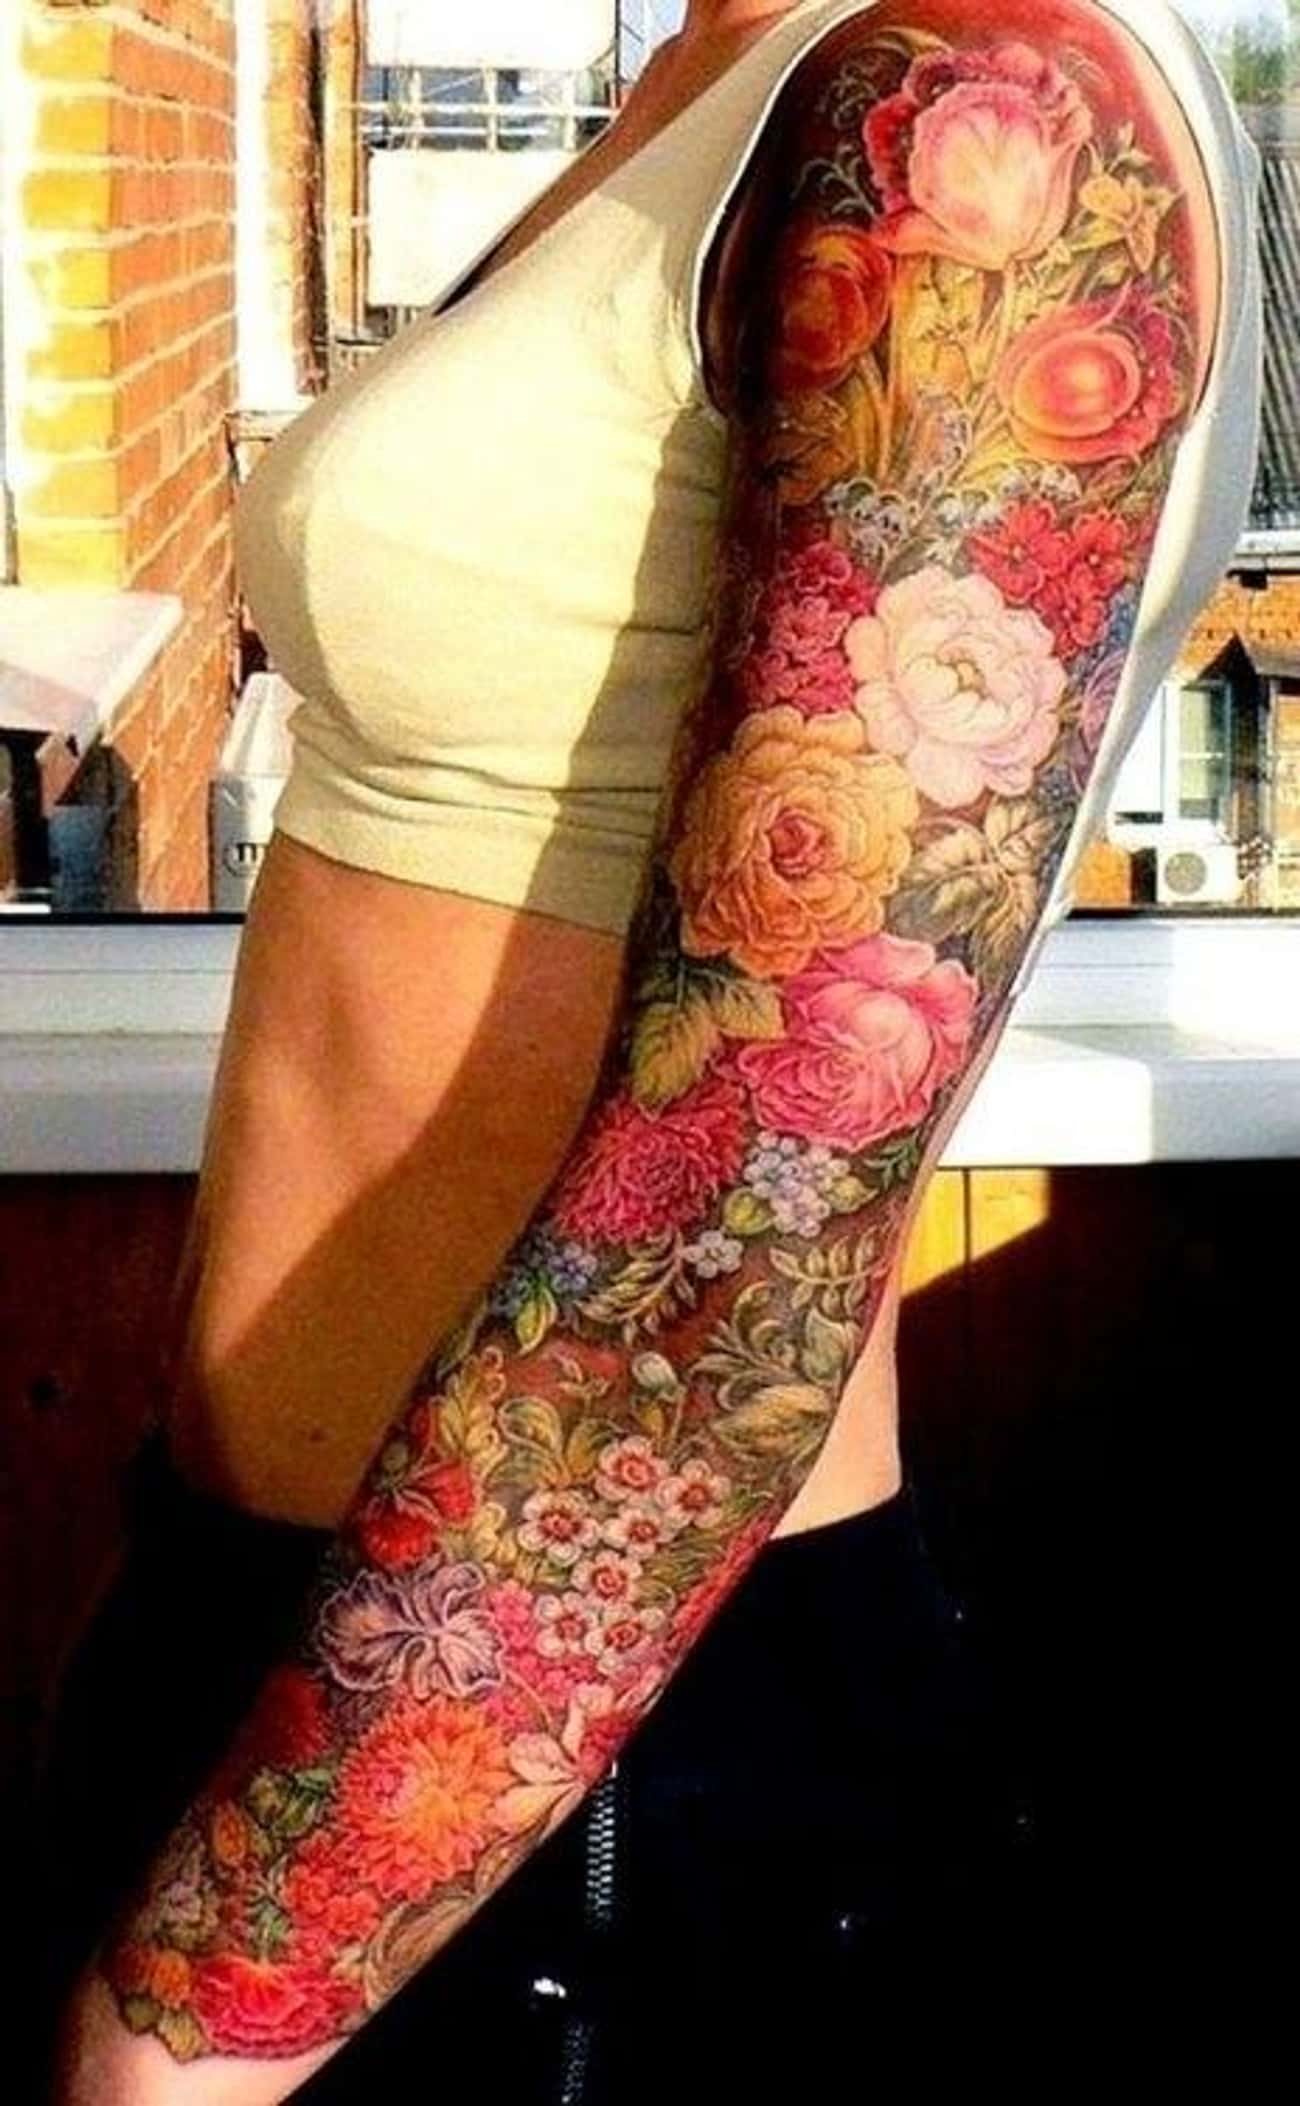 This Incredibly Detailed Flower Full Sleeve